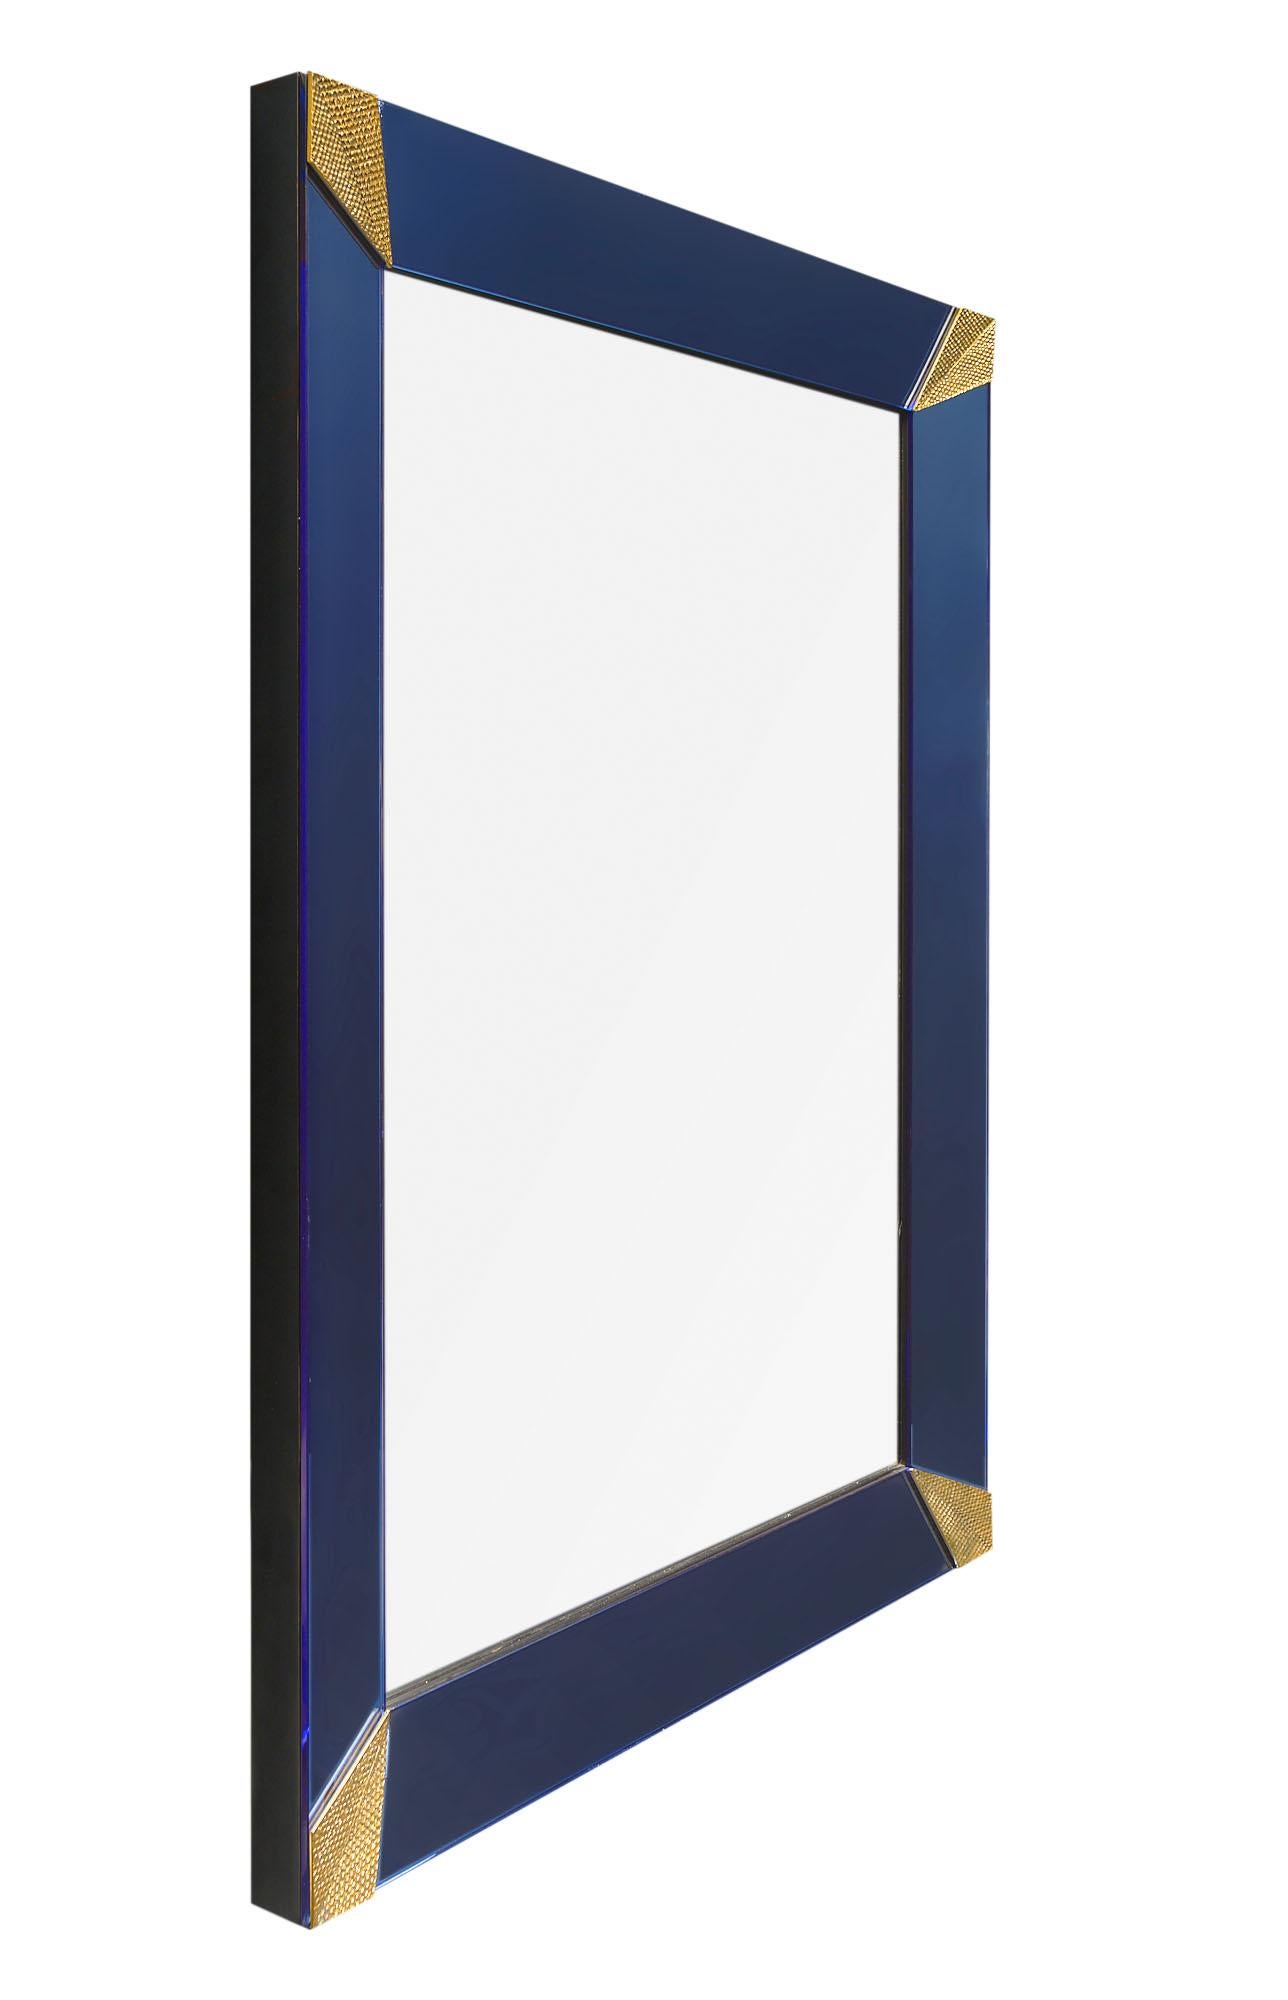 A pair of Murano glass grand mirrors made of blue glass with gold textured triangular corner elements. Can be sold separately upon request.